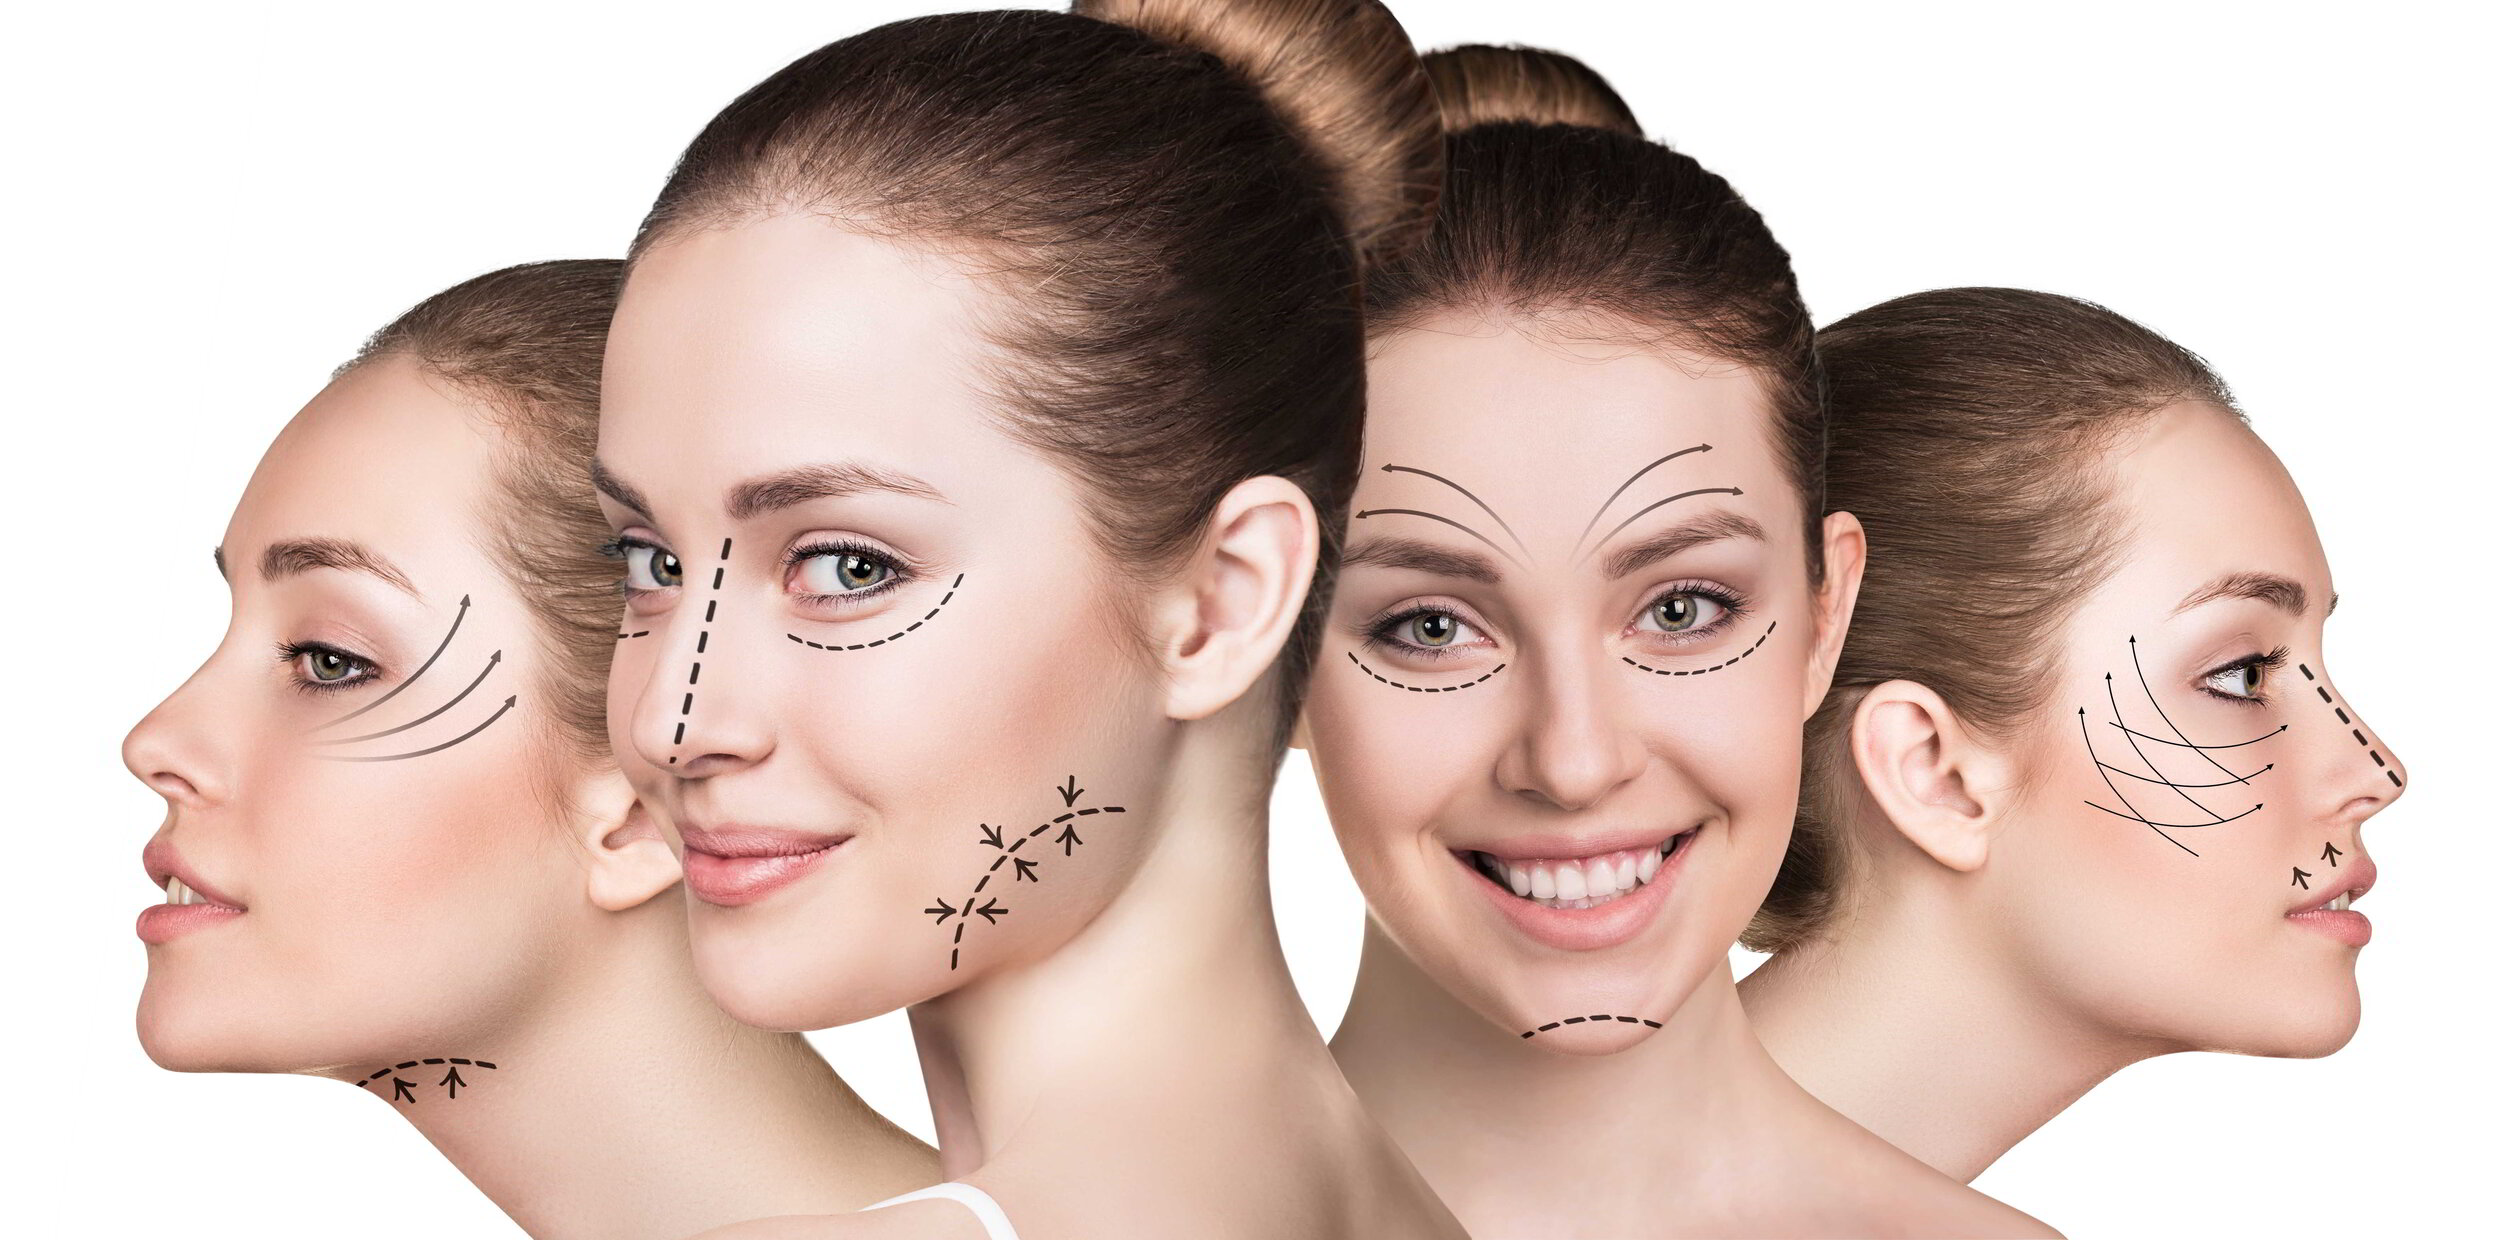 Botox and Dermal Fillers: Myths and Misconceptions Debunked